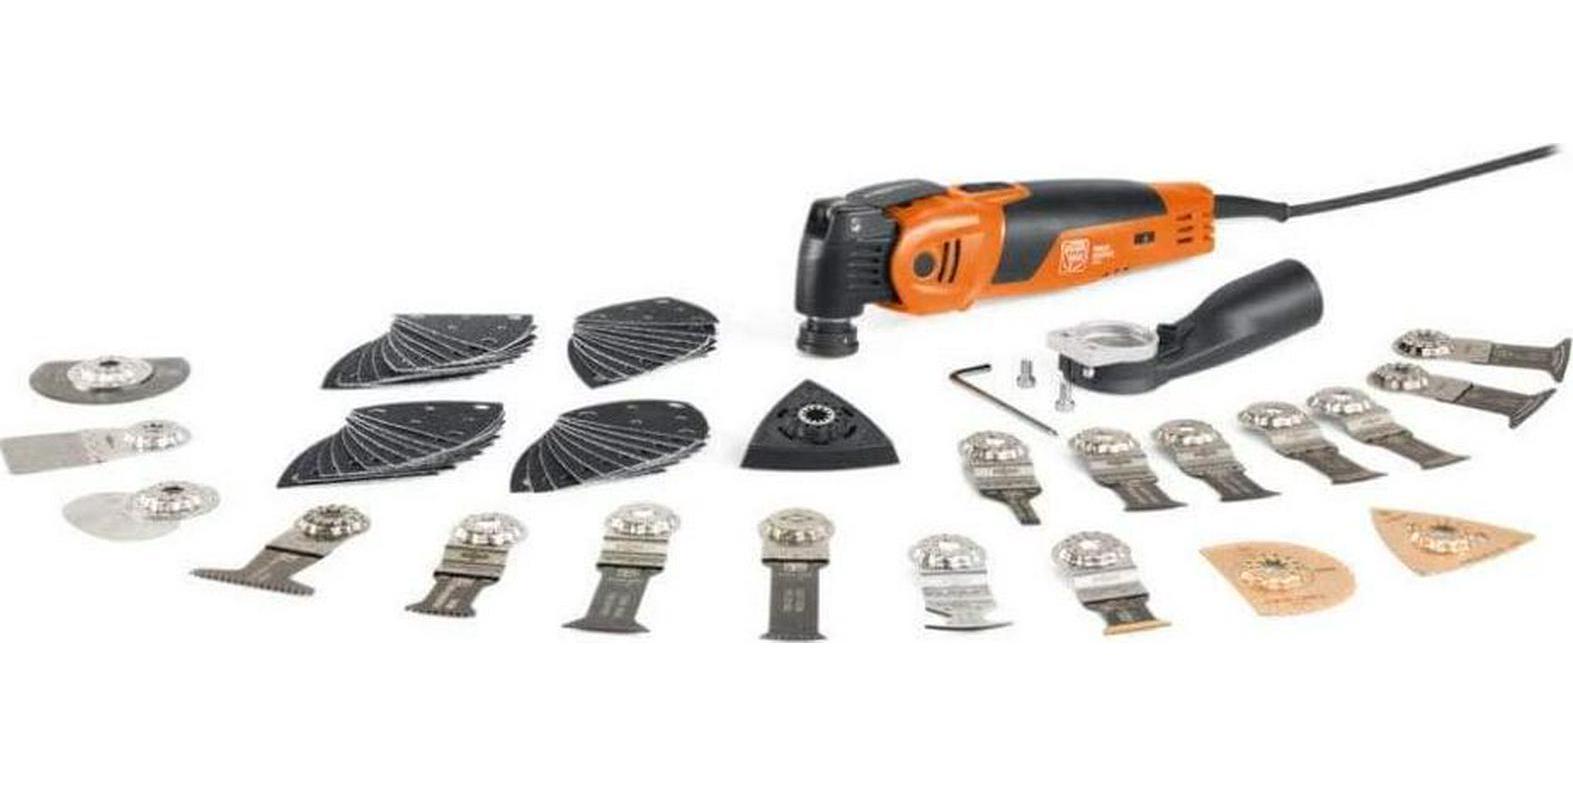 FEIN, Fein 72296861240 MM700Max Top Multimaster Oscillating Multi Tool Set 230V with 60 Accessories